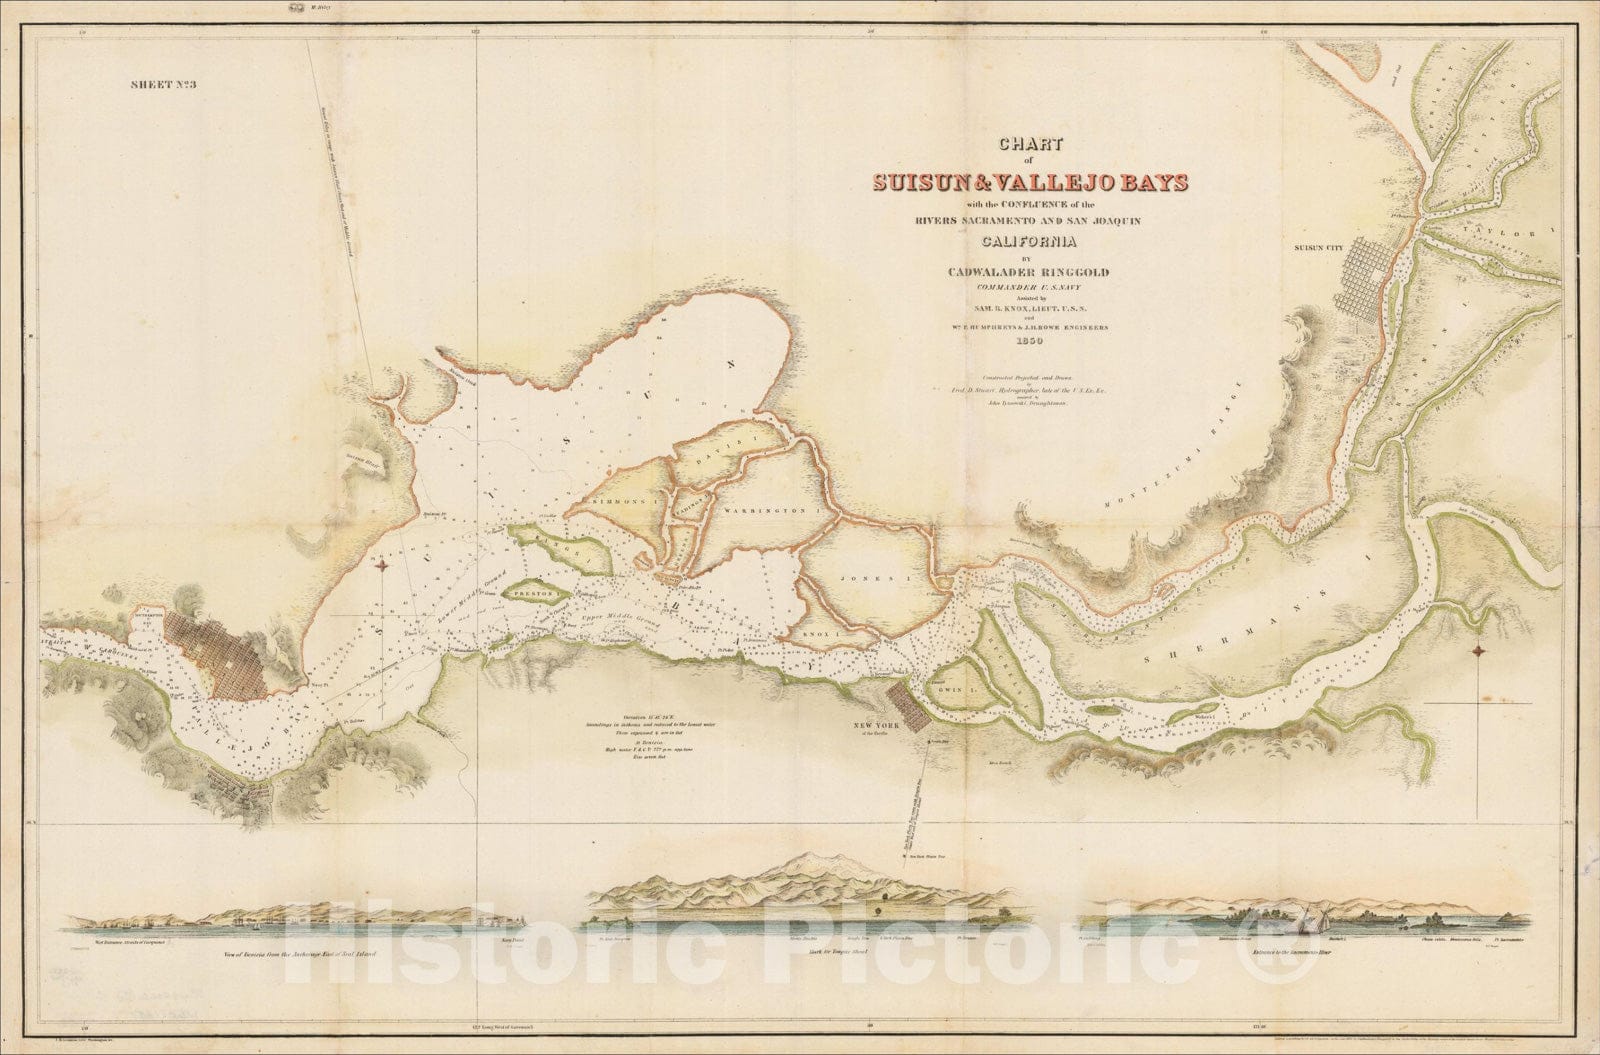 Historic Map : Chart of Suisun & Vallejo Bays with the Confluence of the Rivers Sacramento and San Joaquin California, 1850, Cadwalader Ringgold, Vintage Wall Art